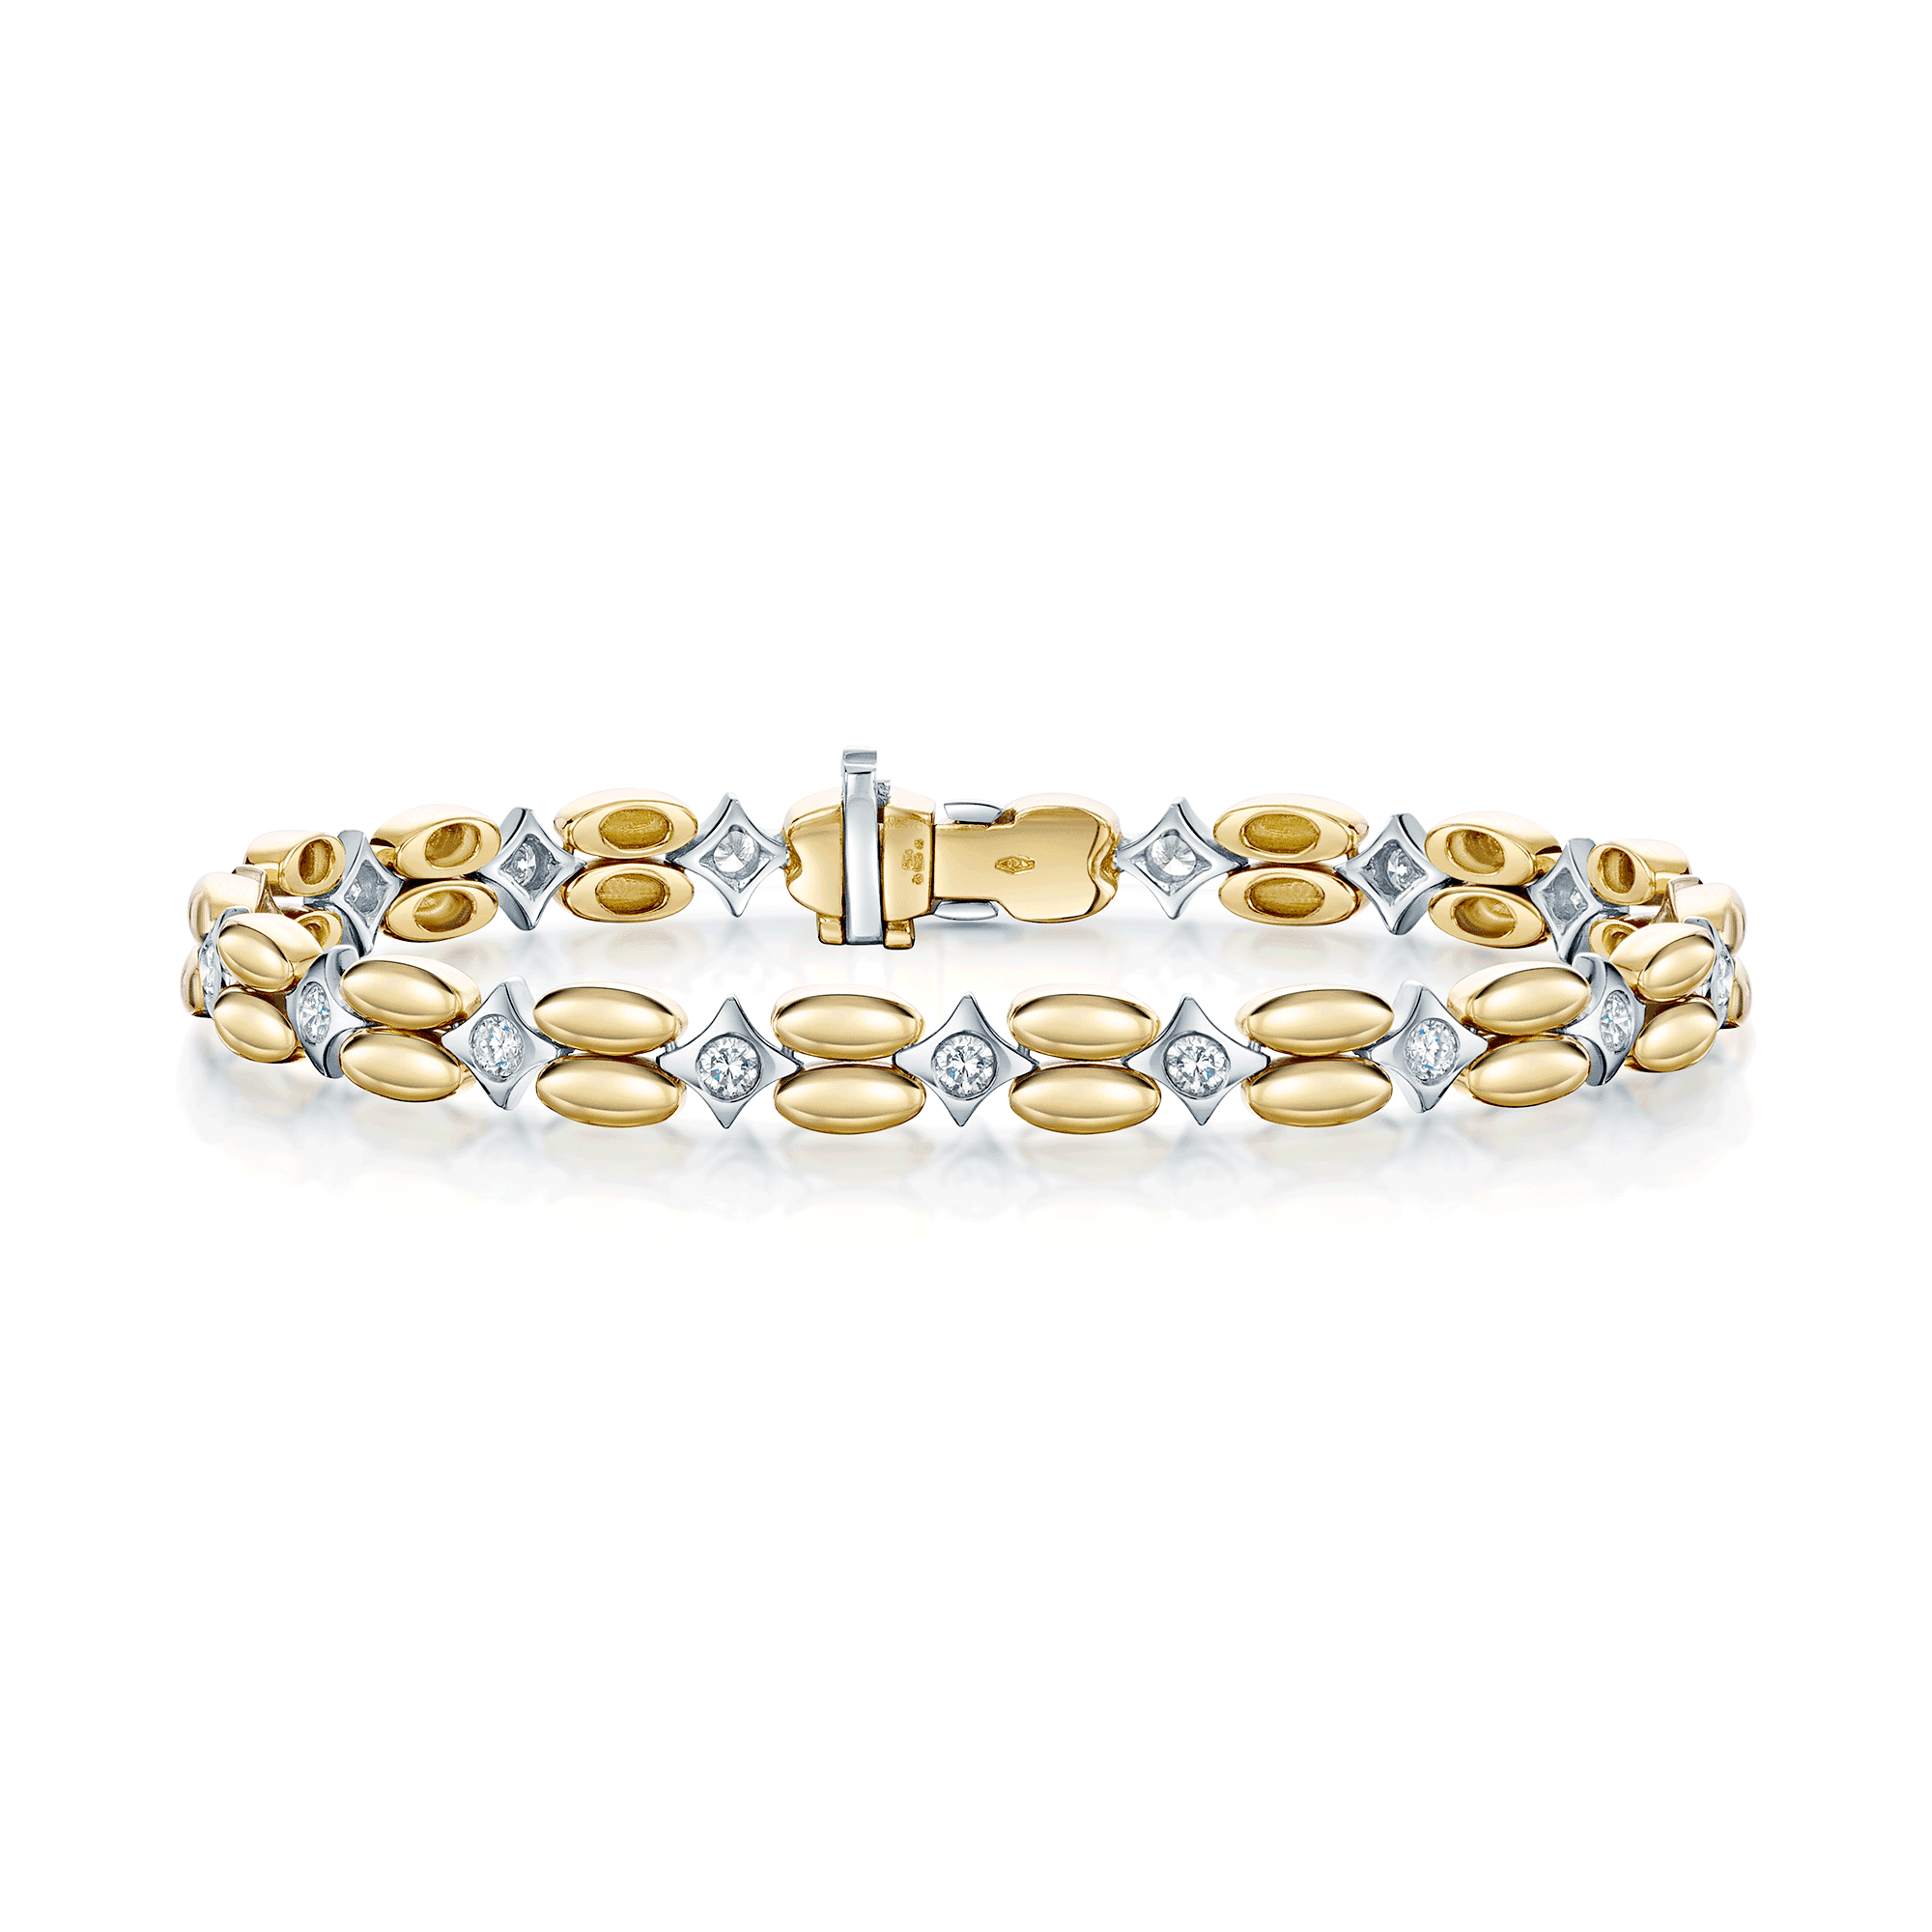 18ct Yellow Gold Double Oval & 18ct White Gold Square Rub Over Diamond Set Link Bracelet